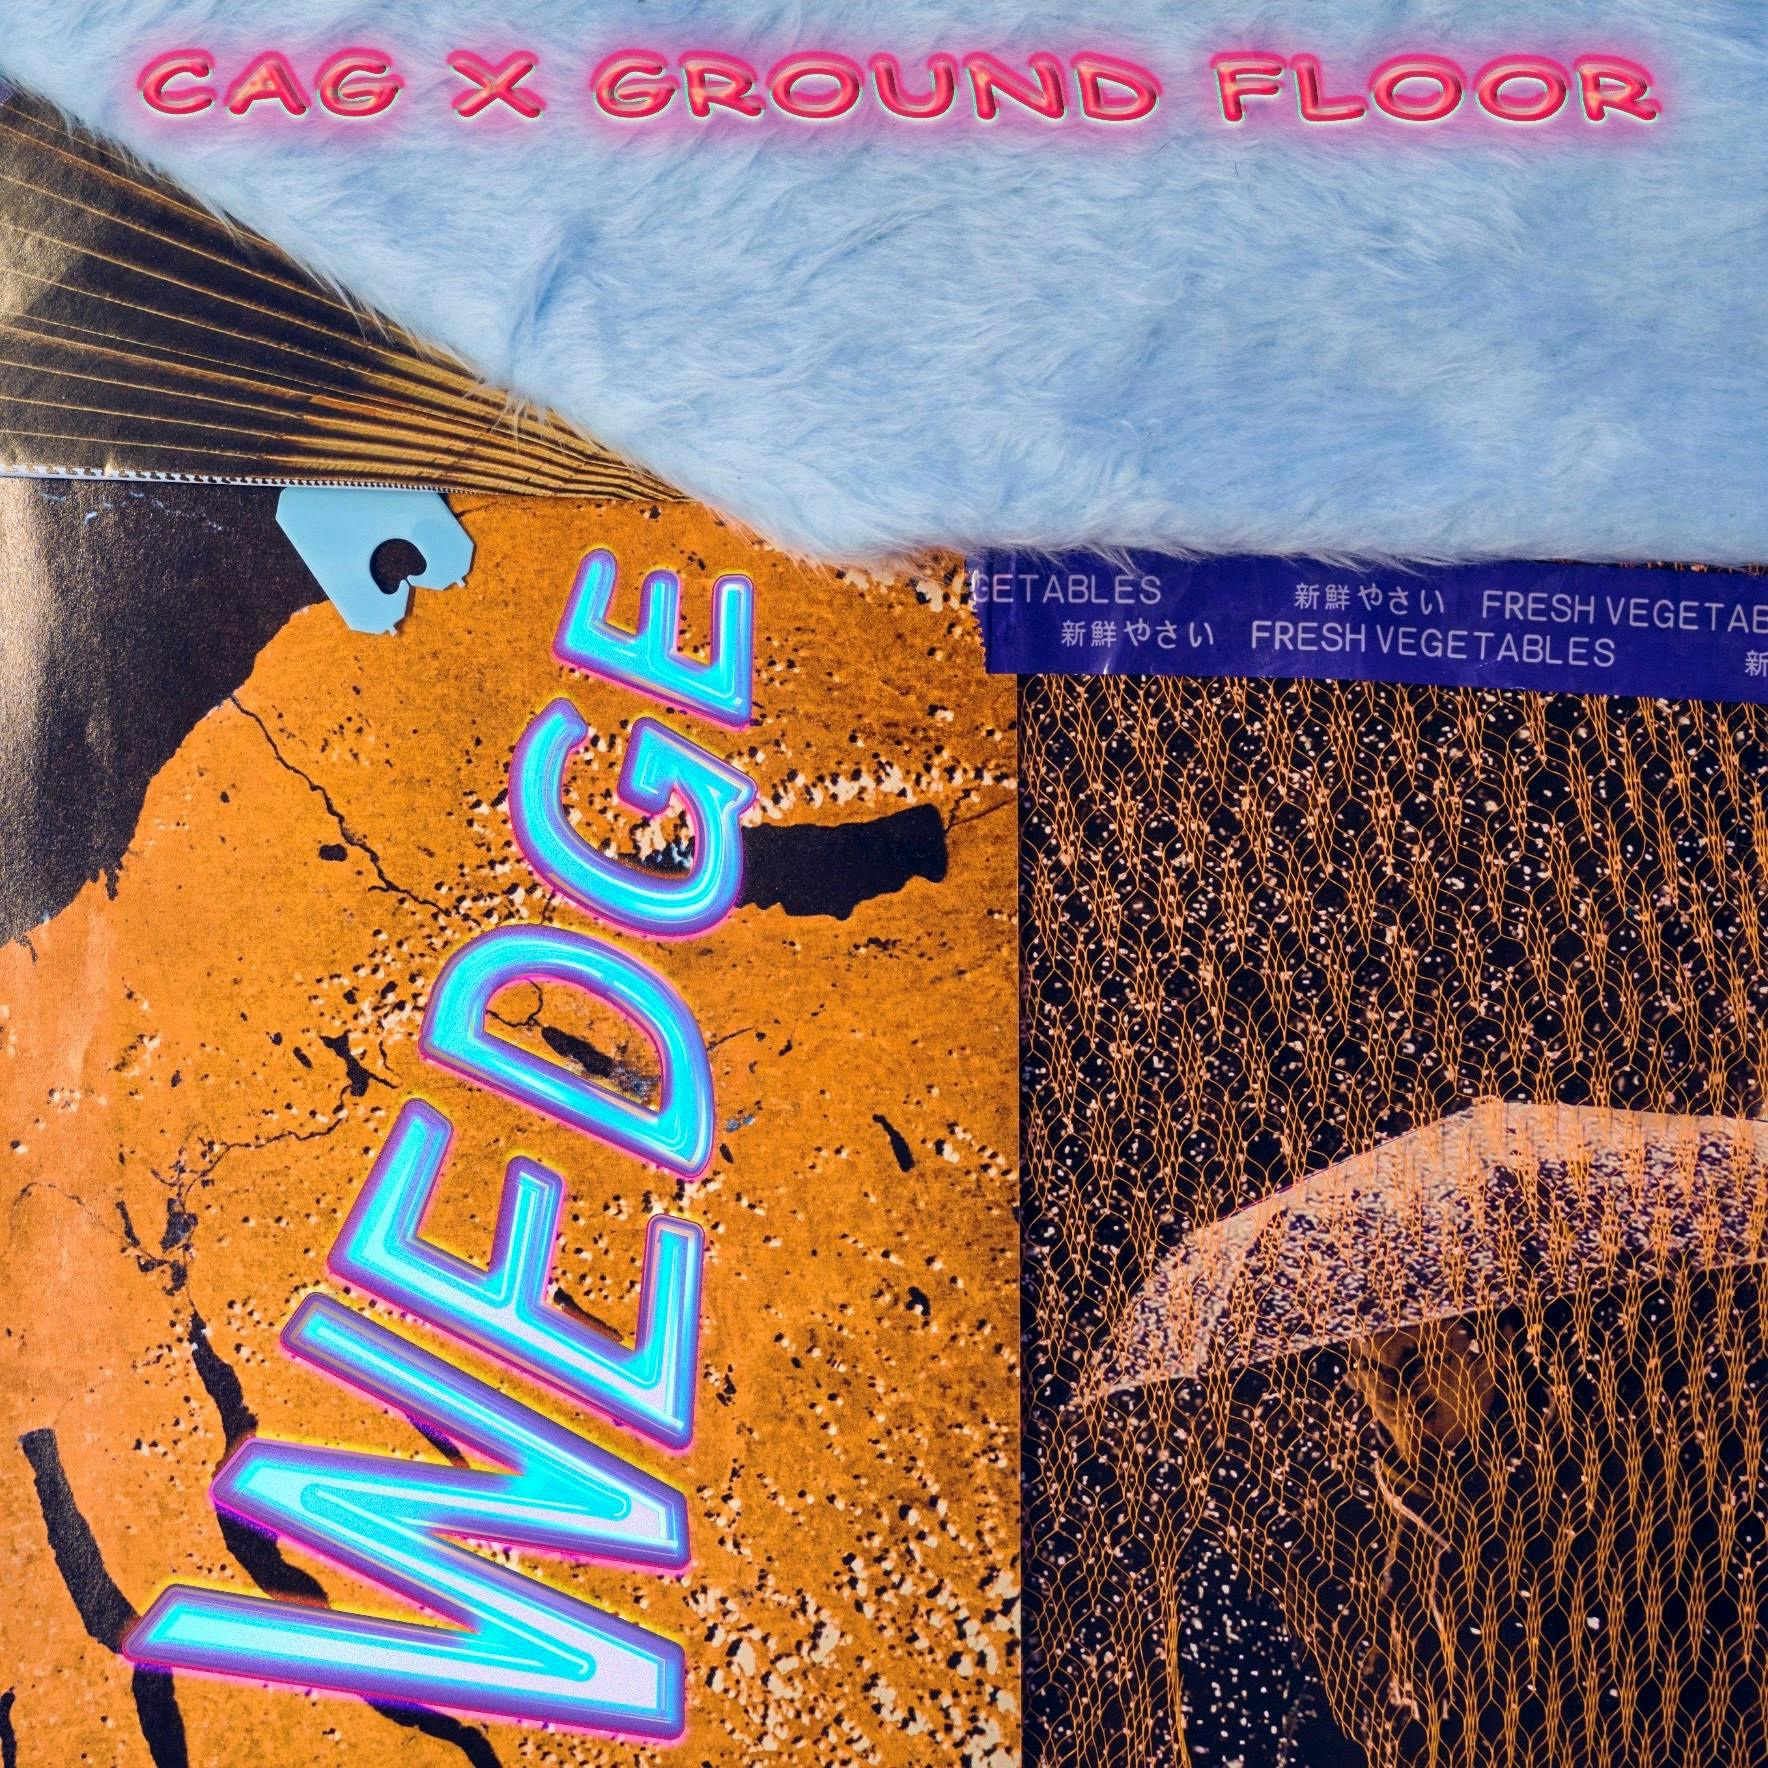 A collage featuring, amongst other details, a bird’s-eye view of a mottled orange surface, a wedge of light blue fun fur and a bread tag. In blue iridescent text, the word “WEDGE” appears across the image.